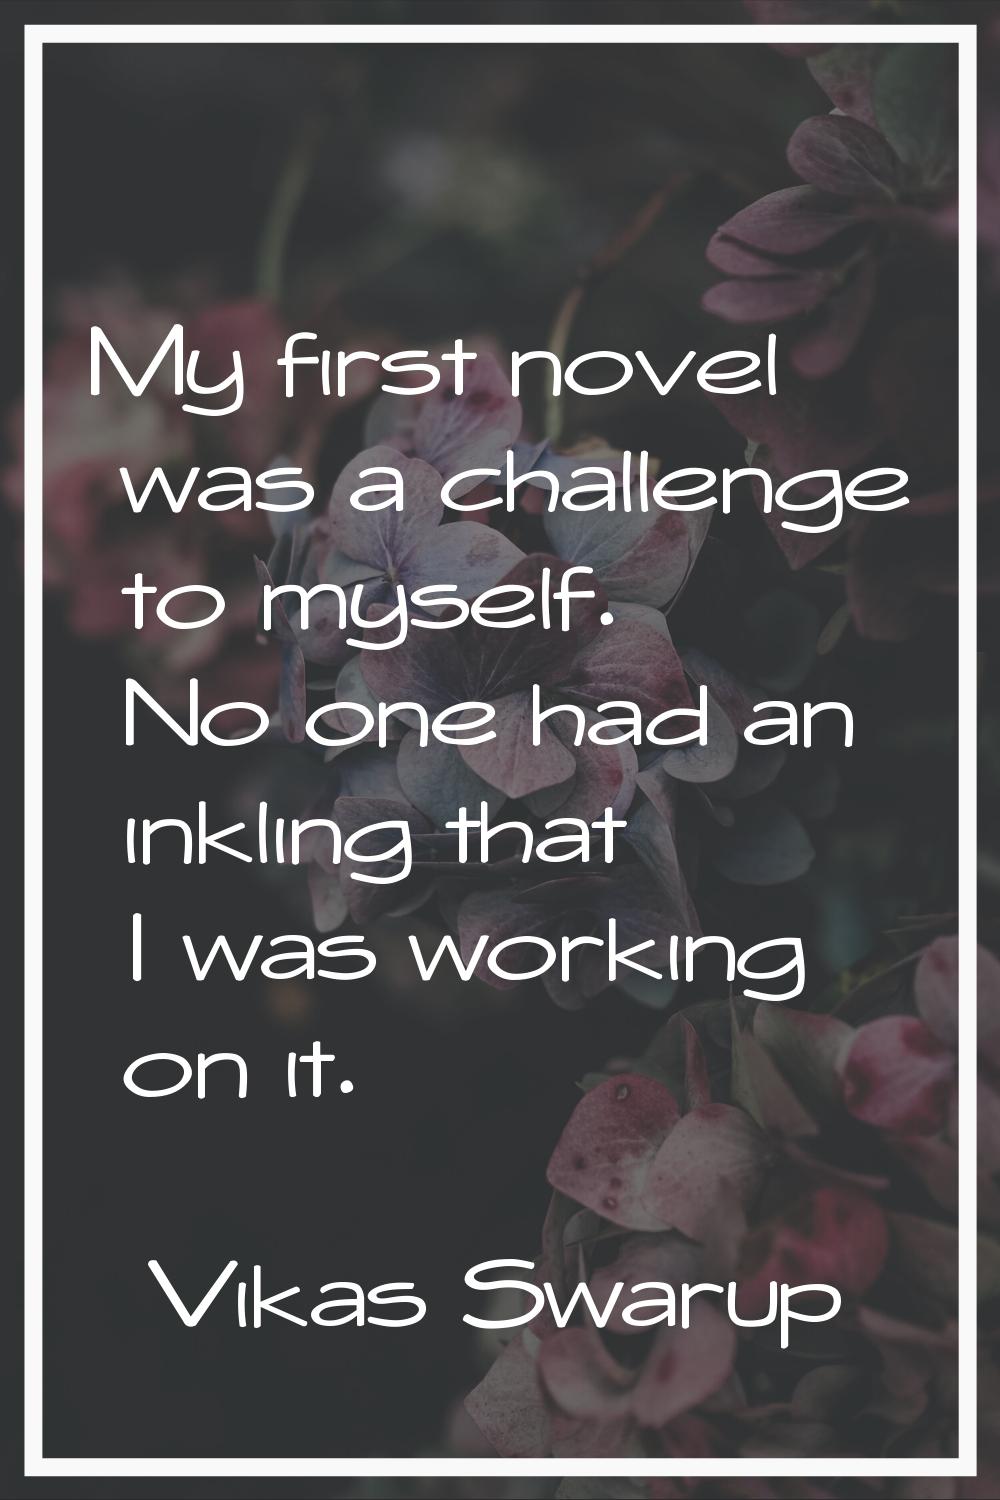 My first novel was a challenge to myself. No one had an inkling that I was working on it.